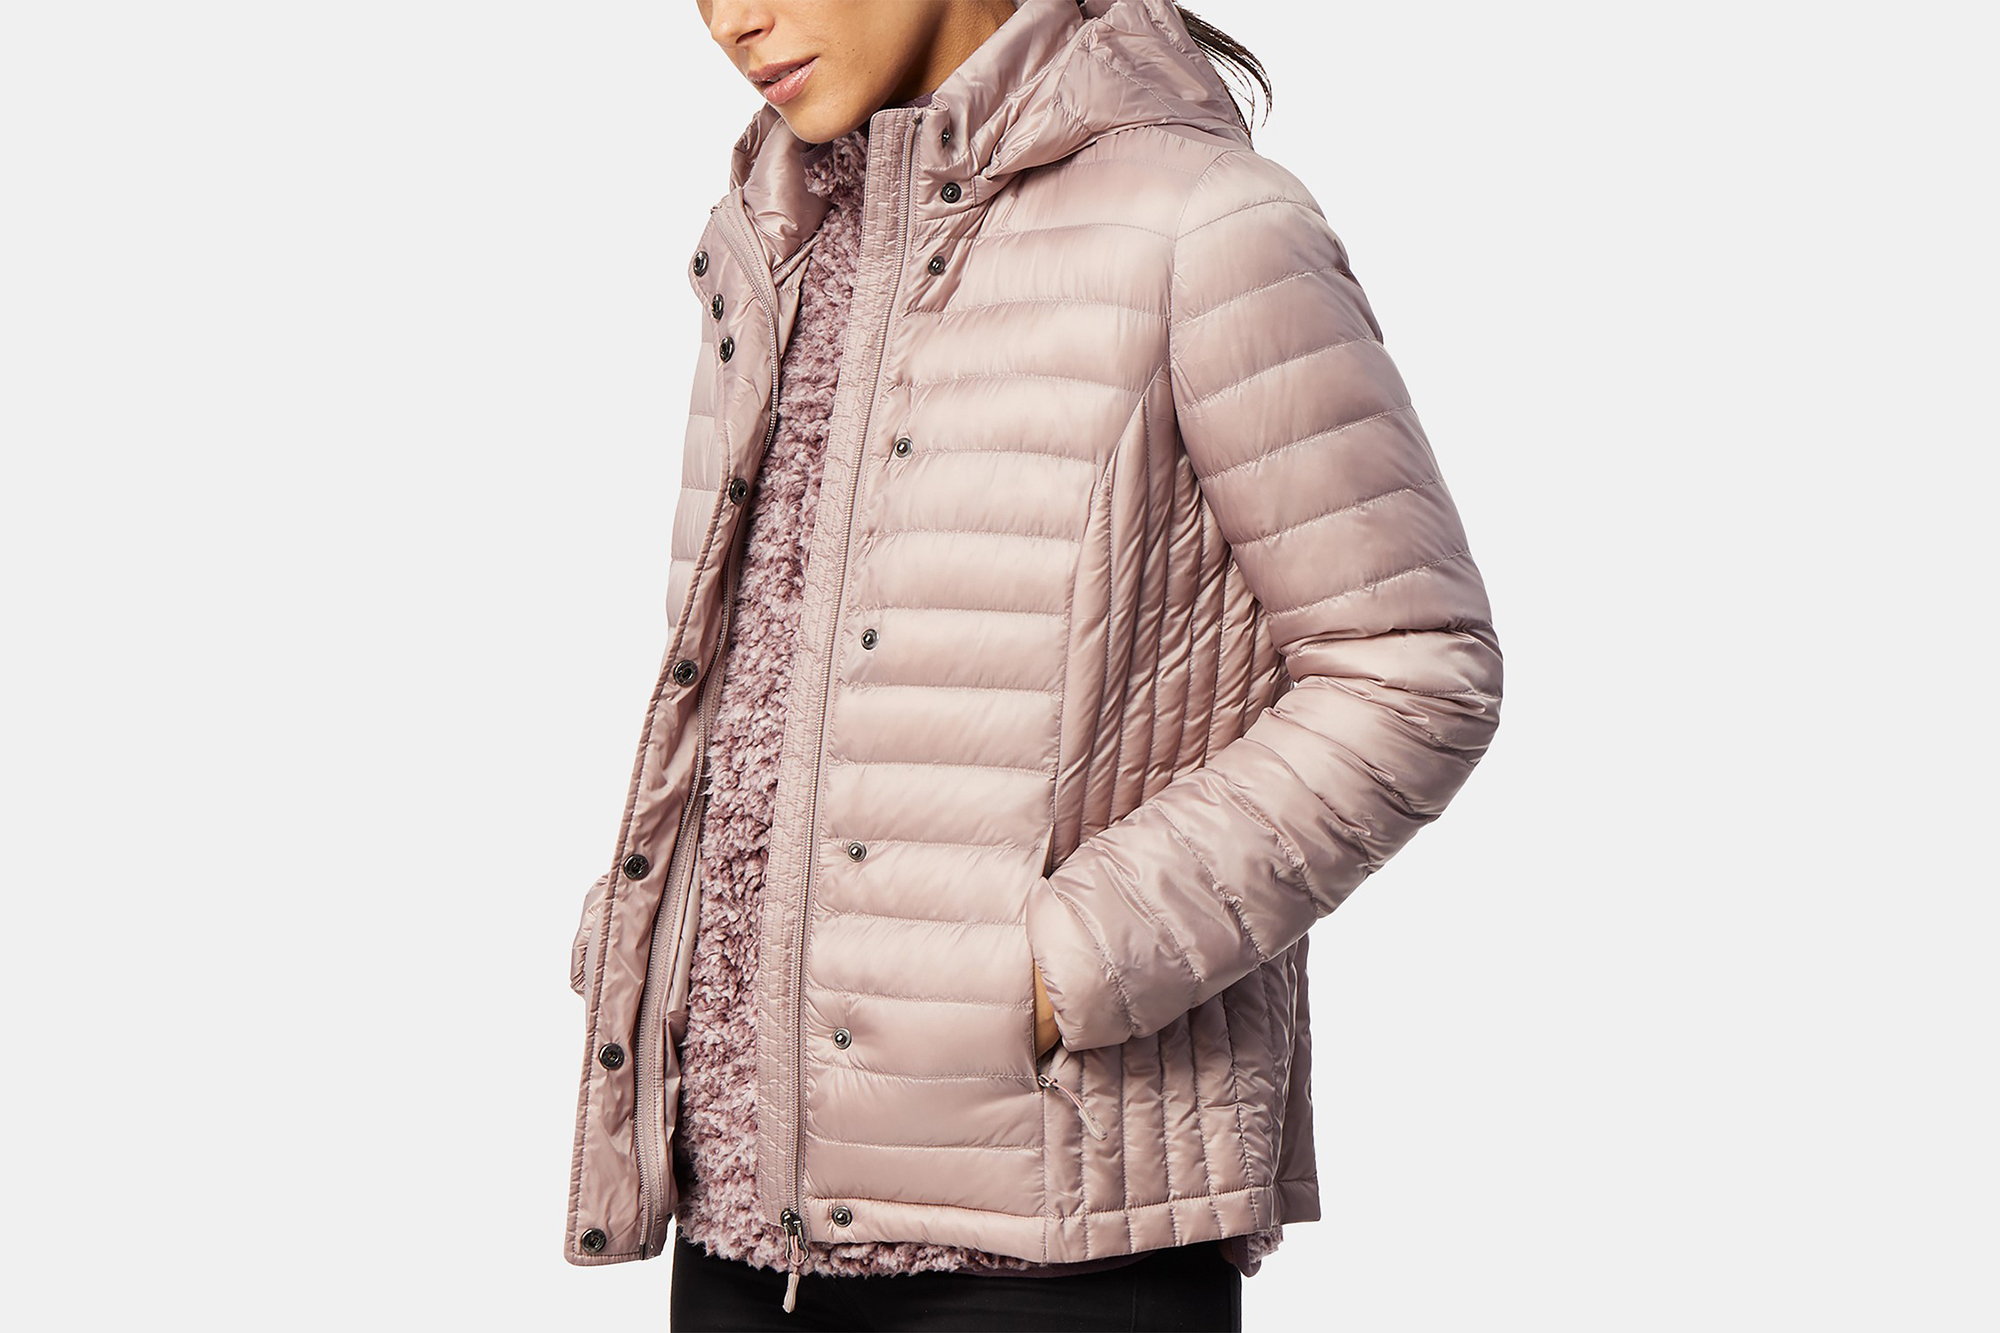 32 Degree Jackets, Outerwear, & Accessories Up to 85% Off